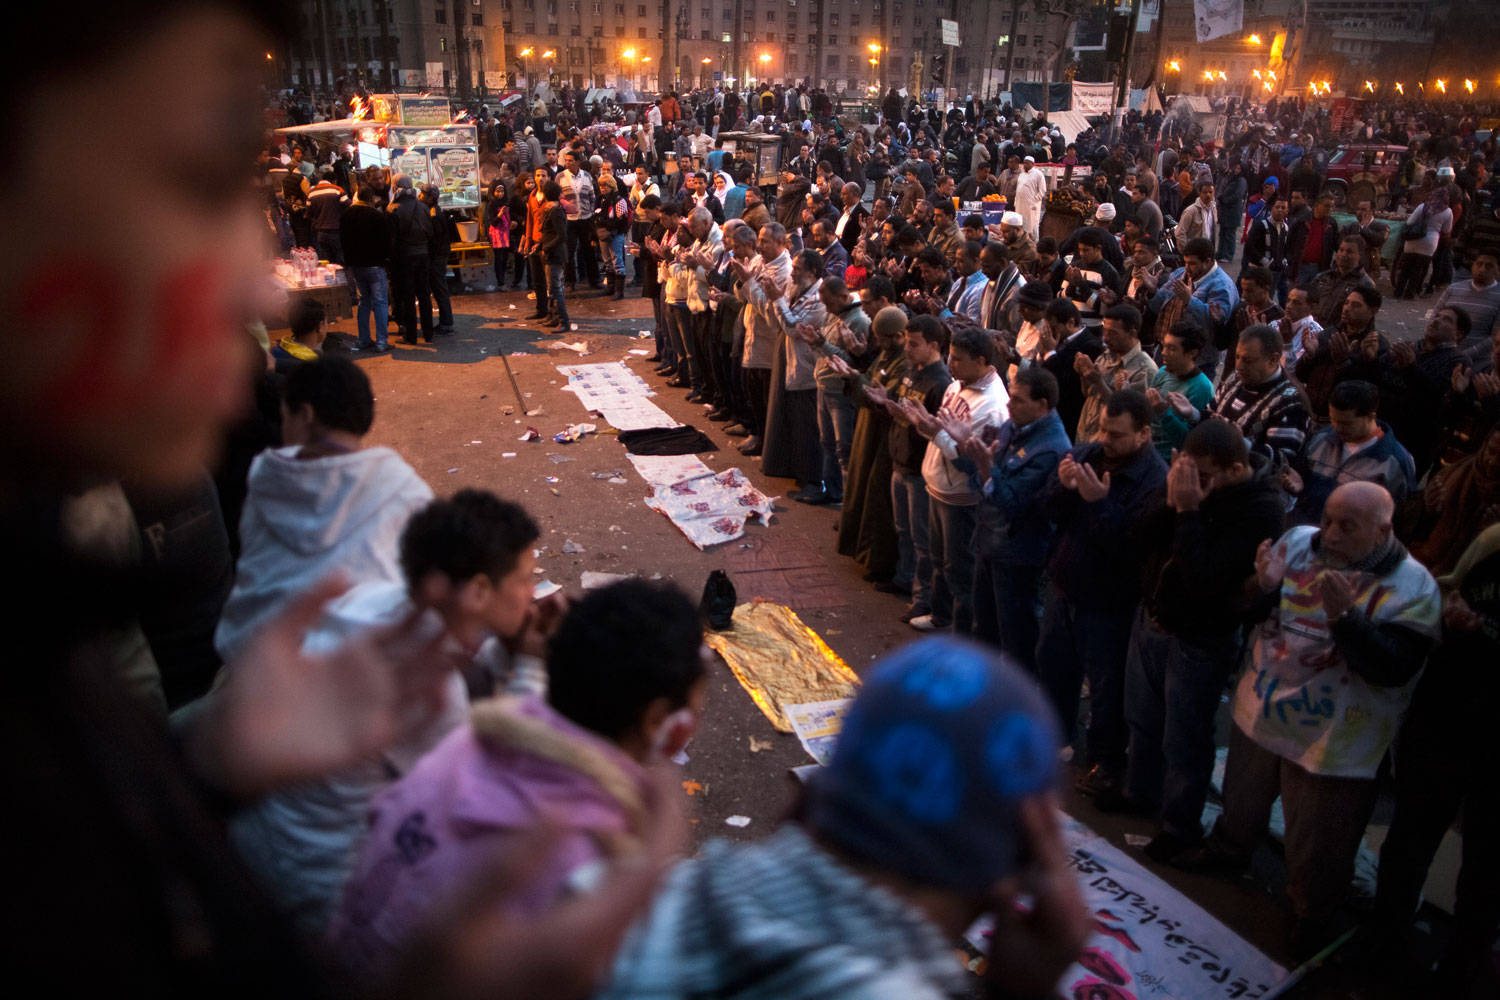 Egyptian youths watch and pray along with a large group of Egyptians after speeches in Tahrir Square.